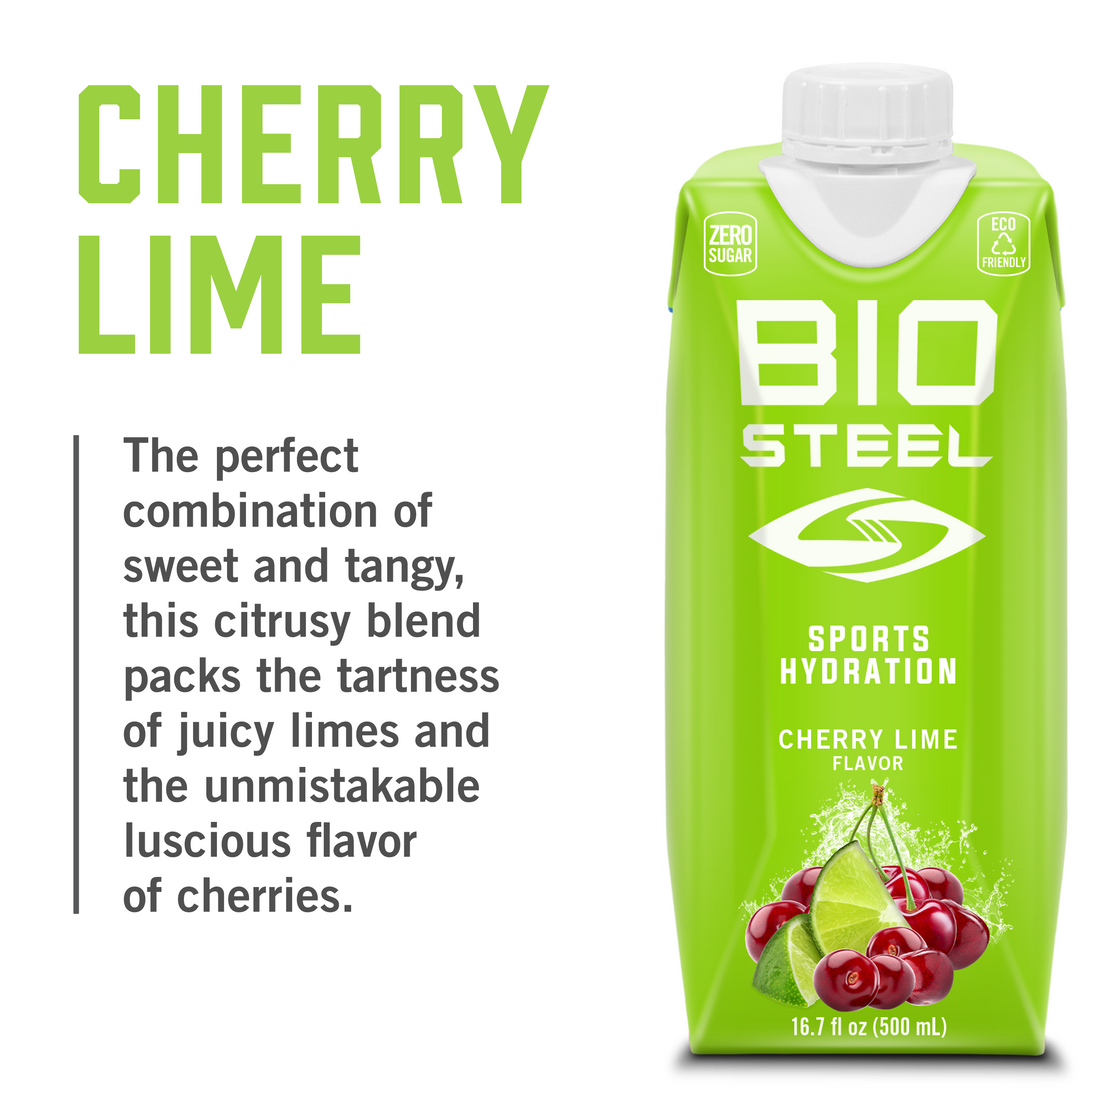 SPORTS DRINK / Cherry Lime - 12 Pack